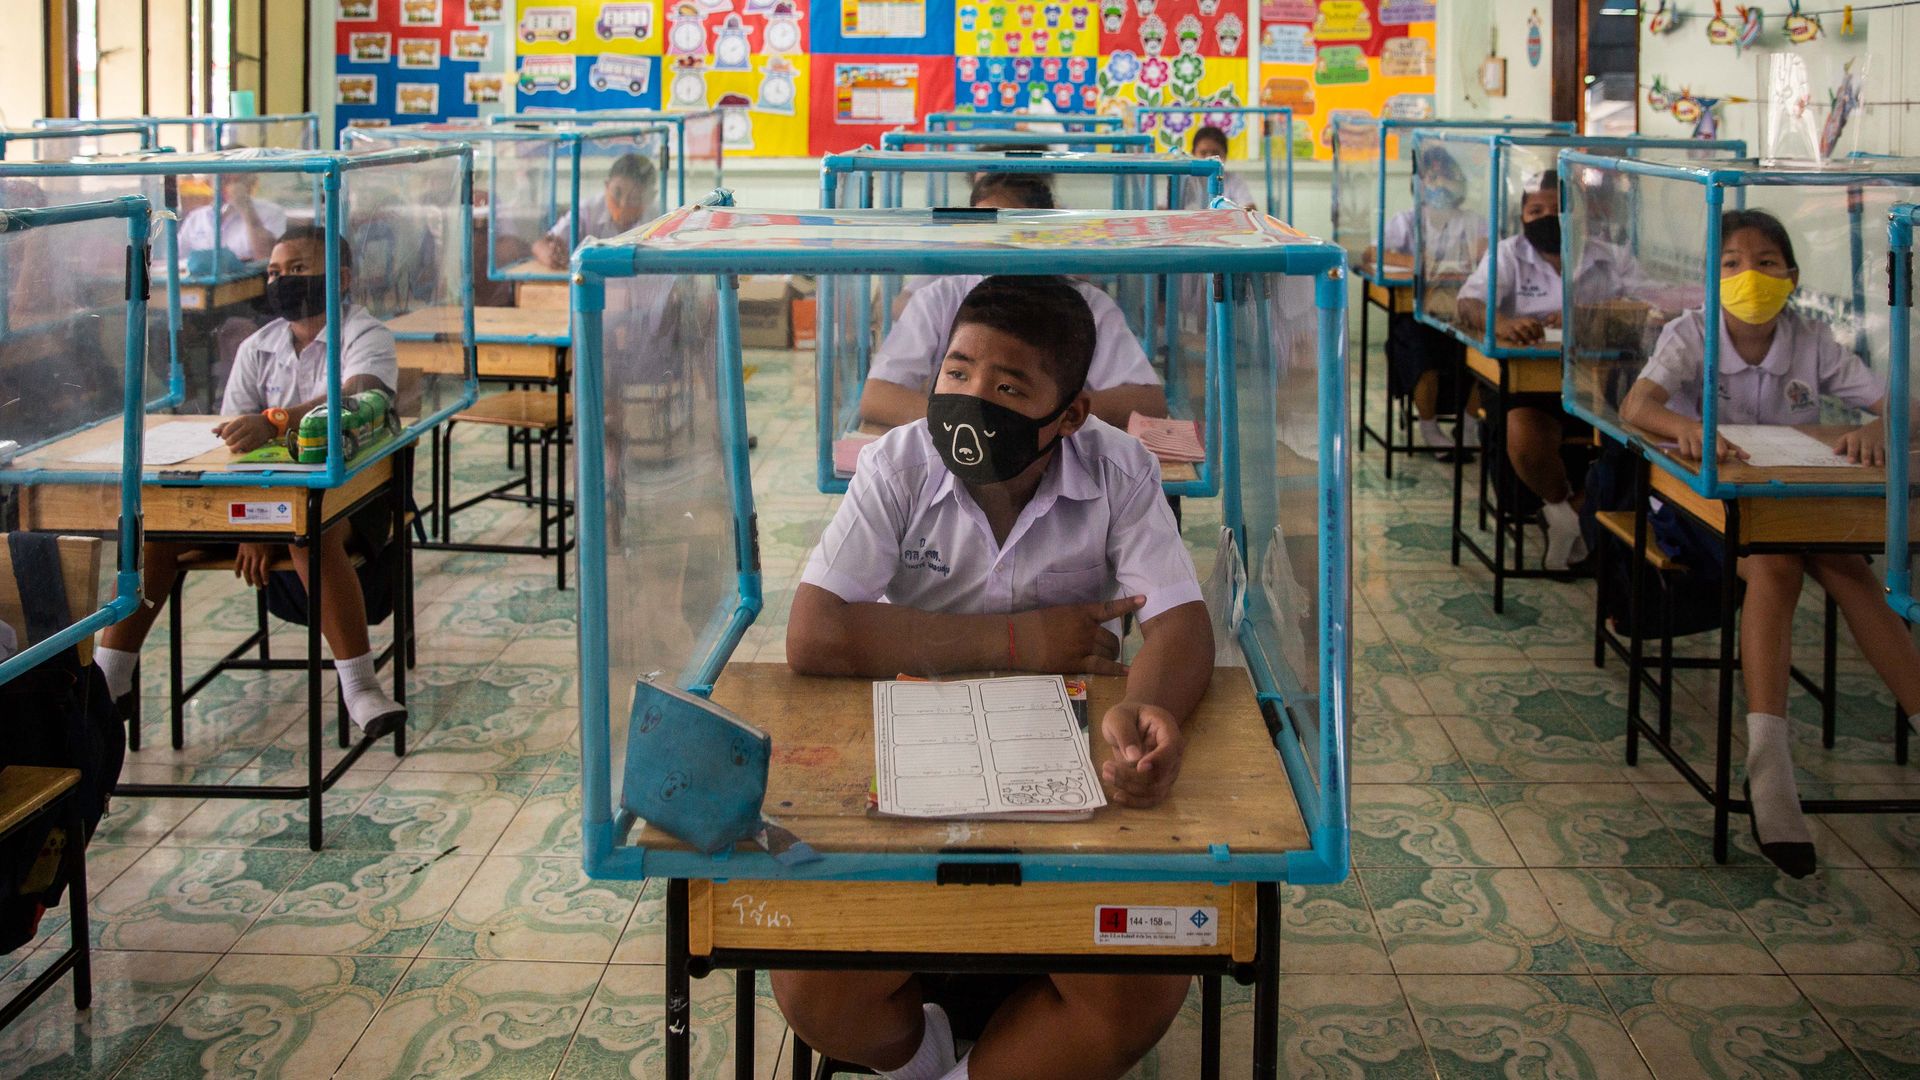  Thai students wear face masks and sit at desks with plastic screens used for social distancing at the Wat Khlong Toey School on August 10, 2020 in Bangkok, Thailand. 